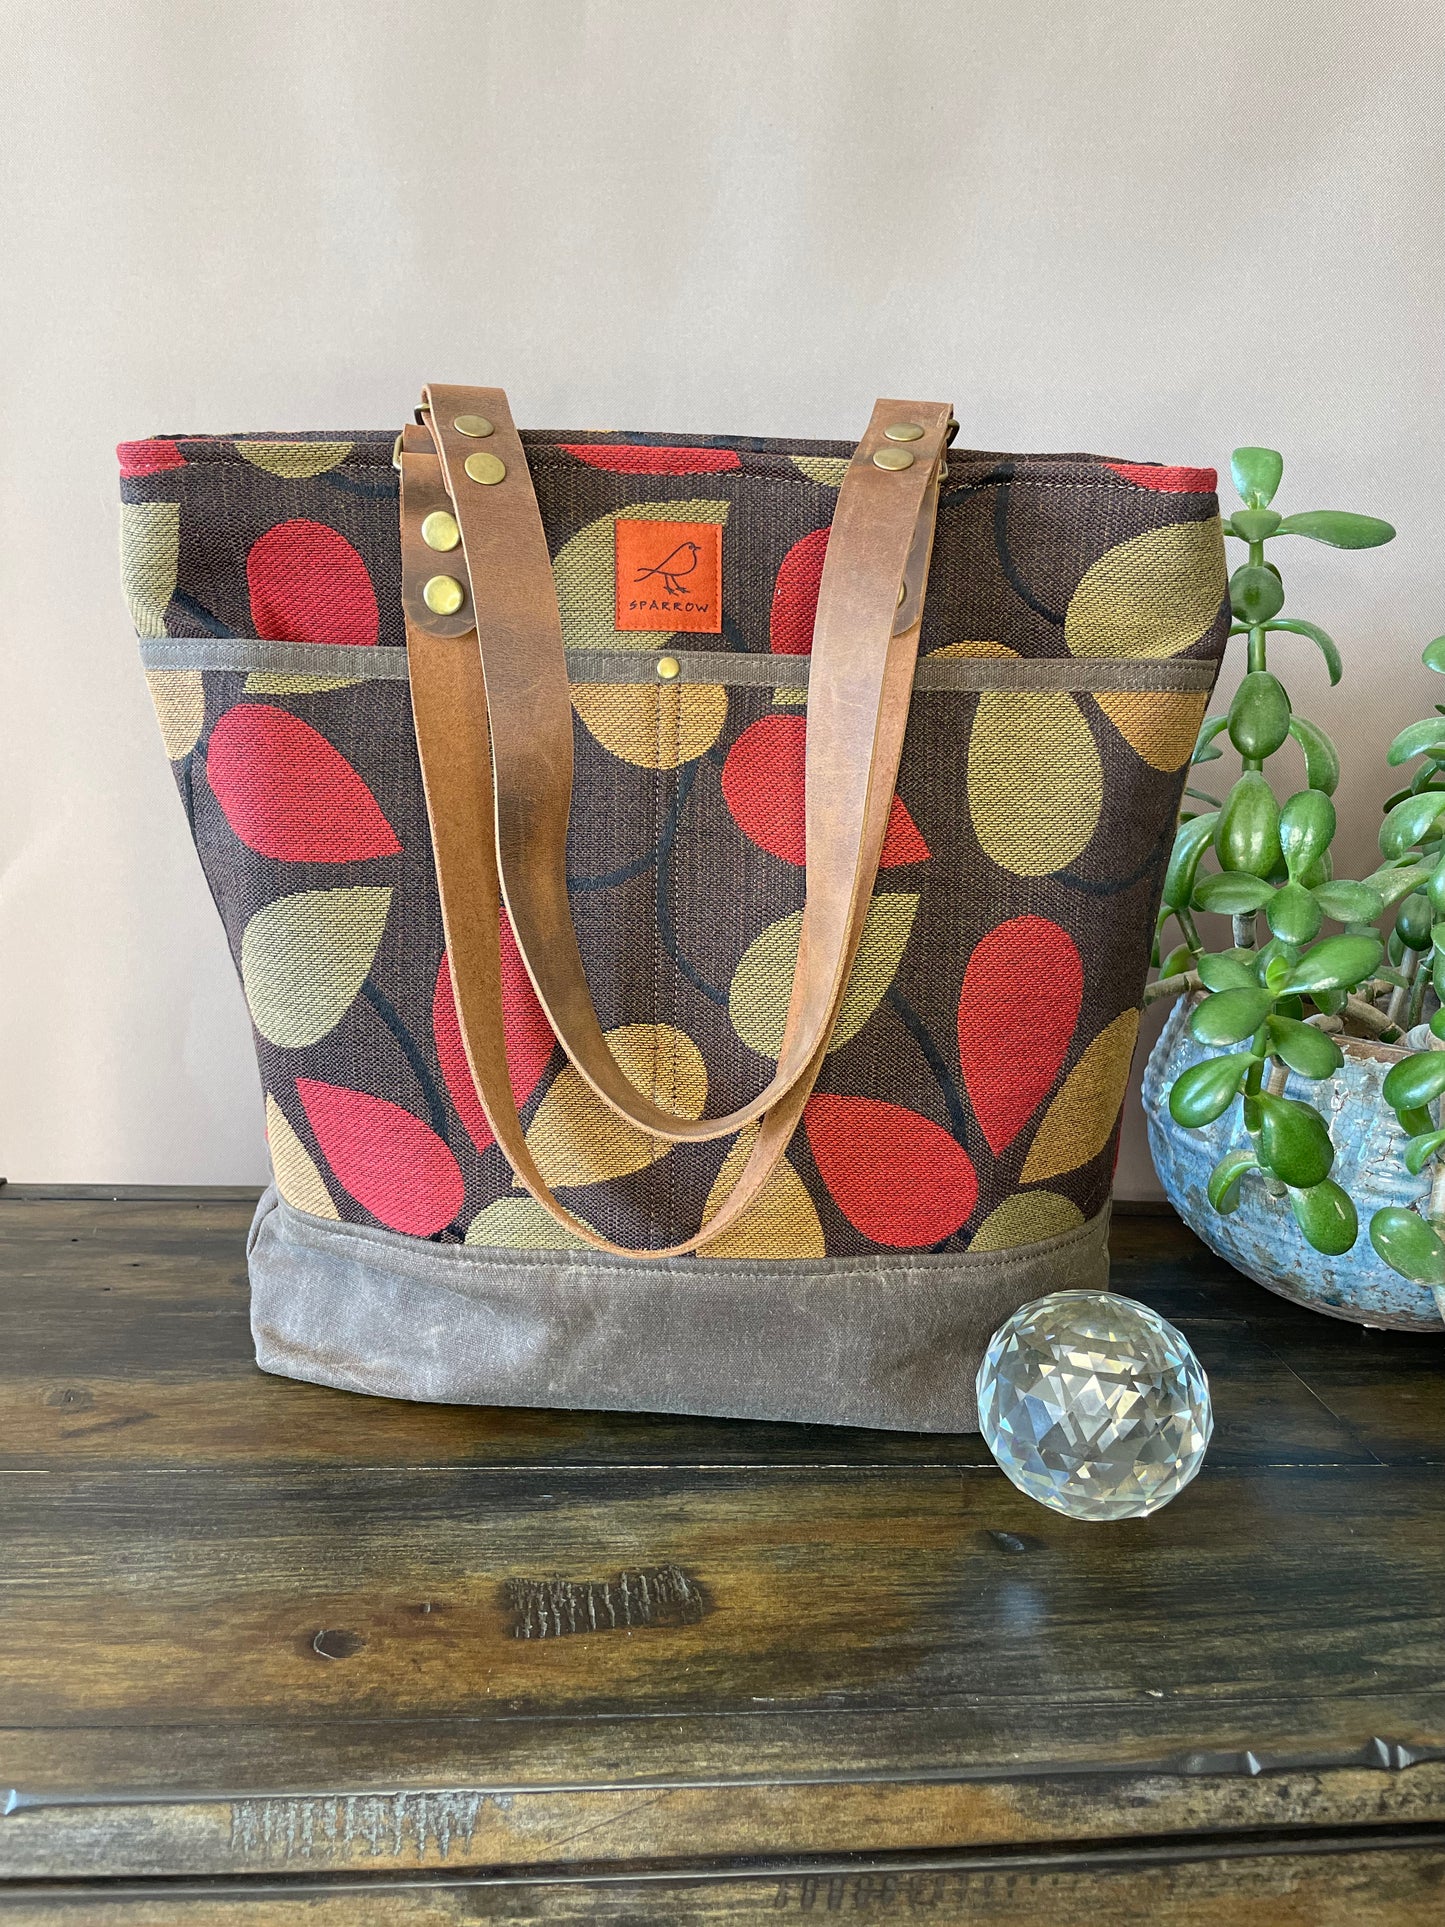 Zipped-Up Tote